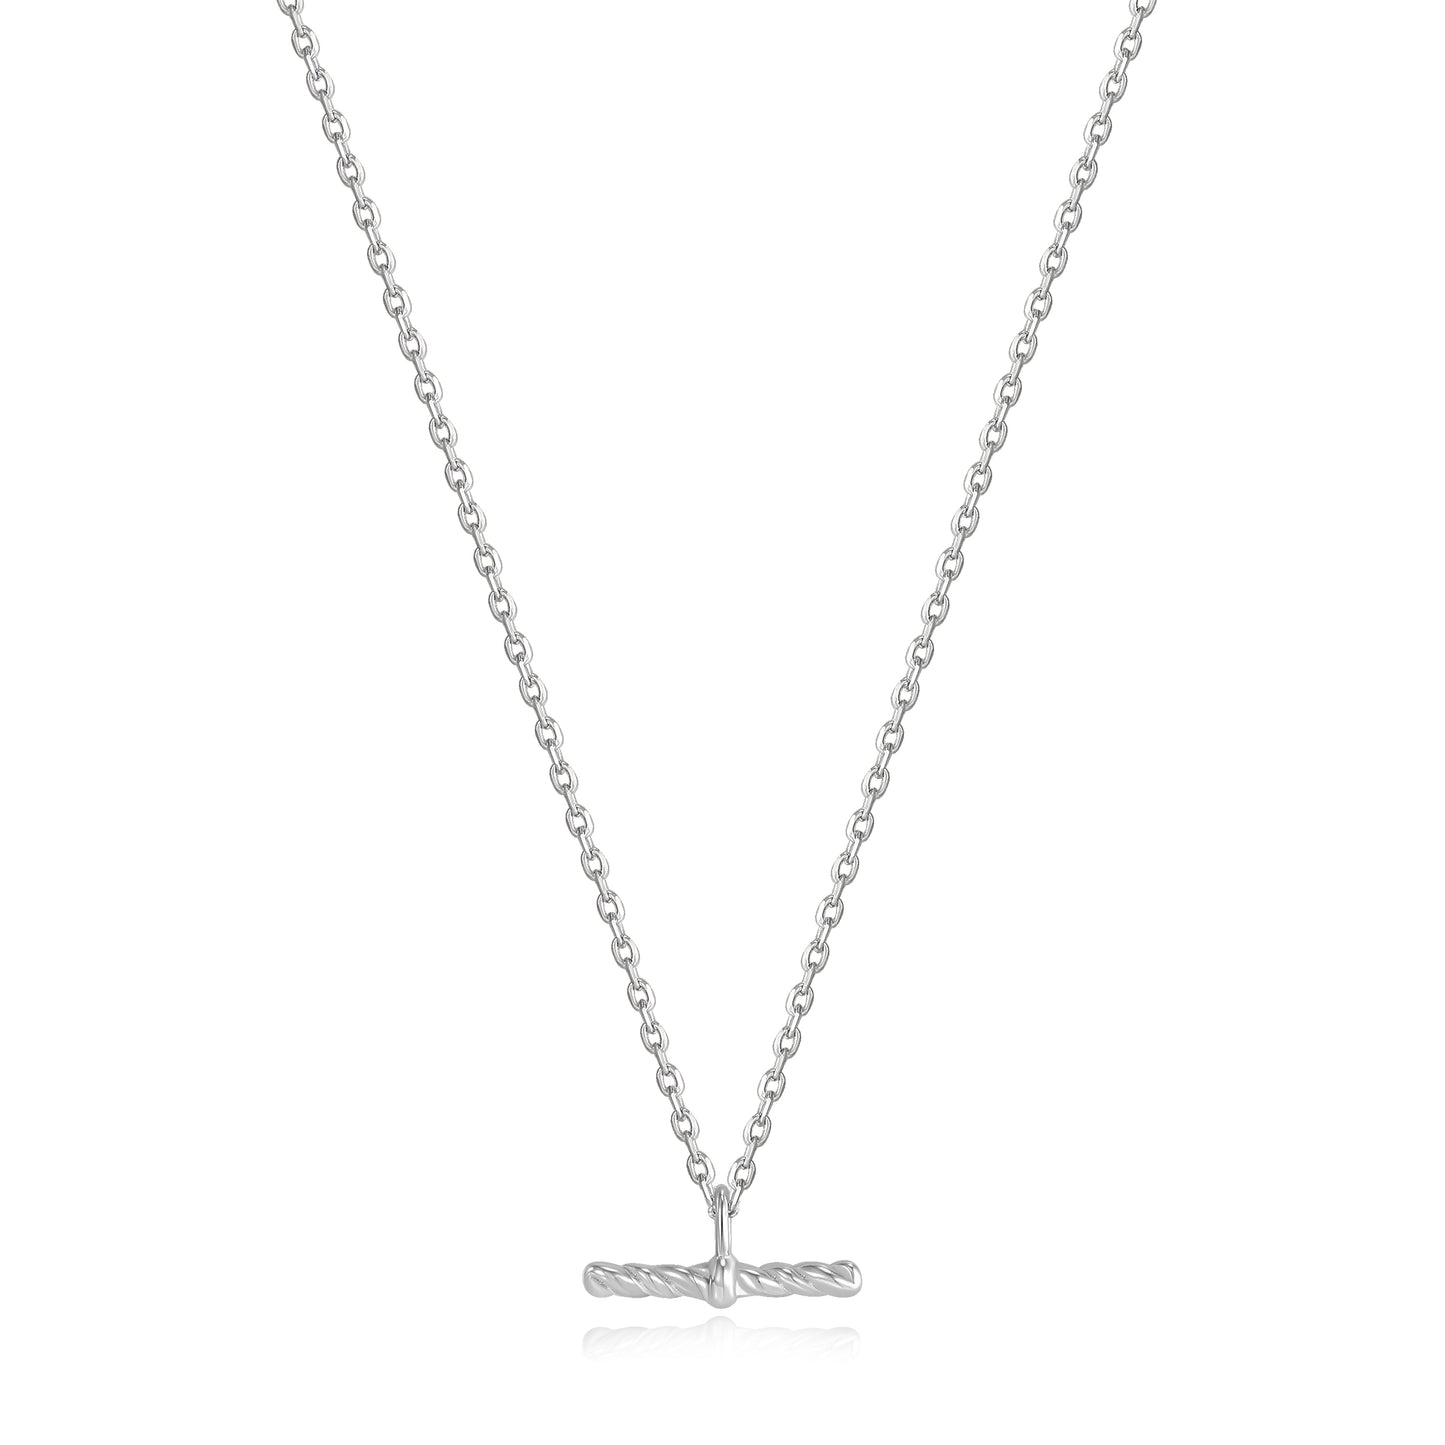 Ania Haie Rhodium Plated Silver Rope T-Bar Necklace